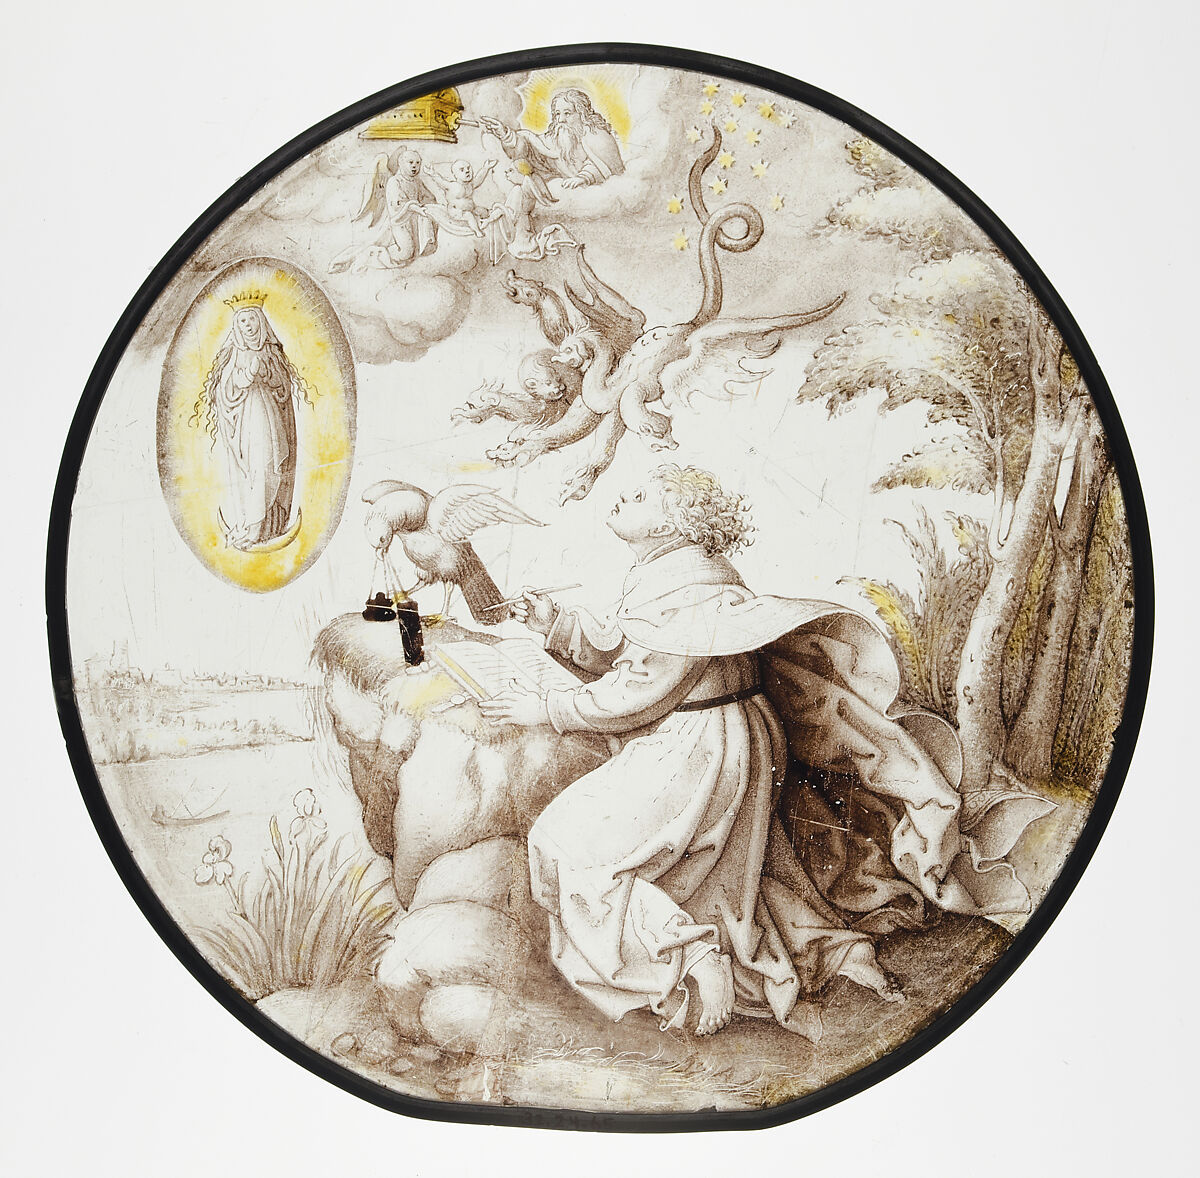 Roundel with Saint John on Patmos with Apocalyptic Vision, Style of Dirck Vellert (Netherlandish, Amsterdam (?) ca. 1480/85–ca. 1547), Colorless glass, vitreous paint and silver stain, South Netherlandish 